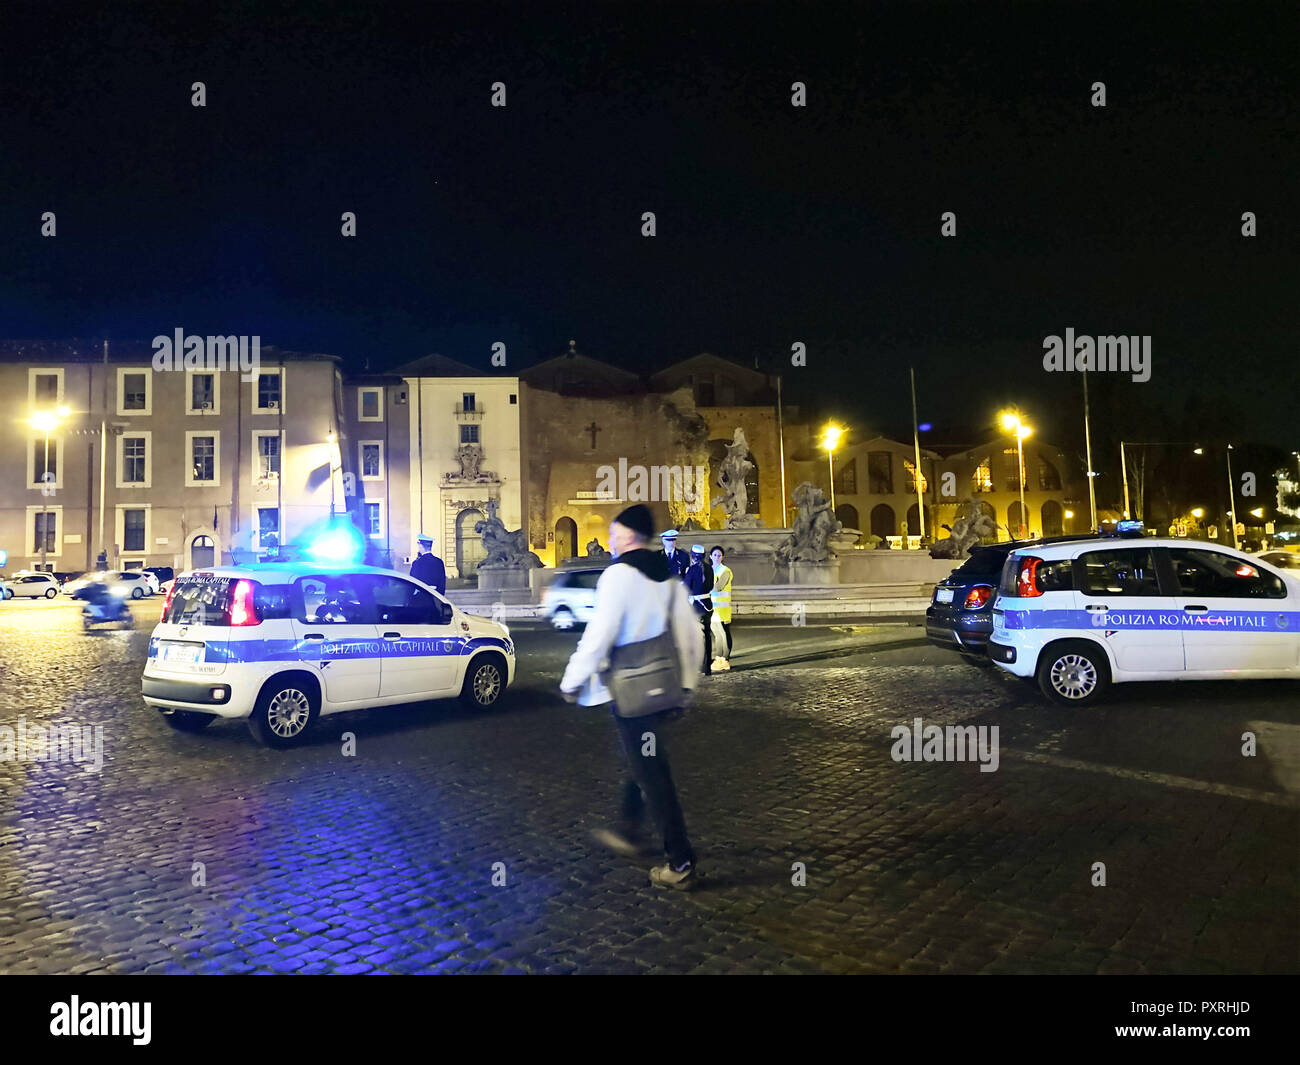 Rome, Italy. 23rd Oct, 2018. Police cars are seen near the metro station where an escalator collapsed in Rome, Italy, on Oct. 23, 2018. At least 20 Russian football fans were injured when an escalator at a busy Rome metro station collapsed on Tuesday night, local media reported. Credit: Chen Zhanjie/Xinhua/Alamy Live News Stock Photo